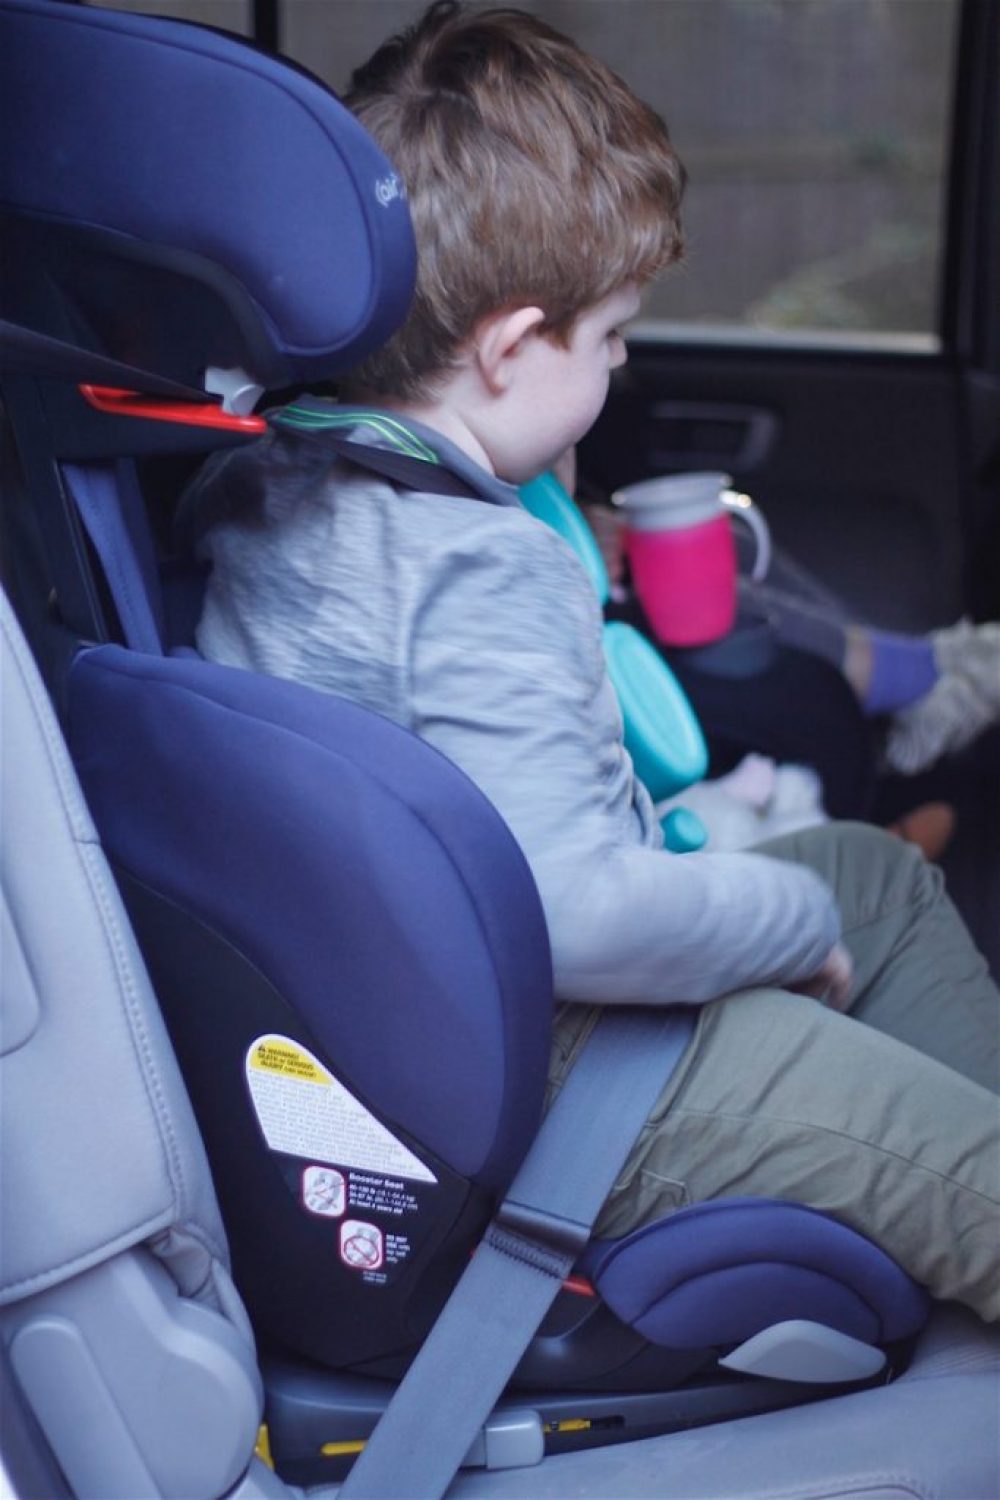 Whiny Wednesdays: Maxi Cosi RodiFix Booster Seat